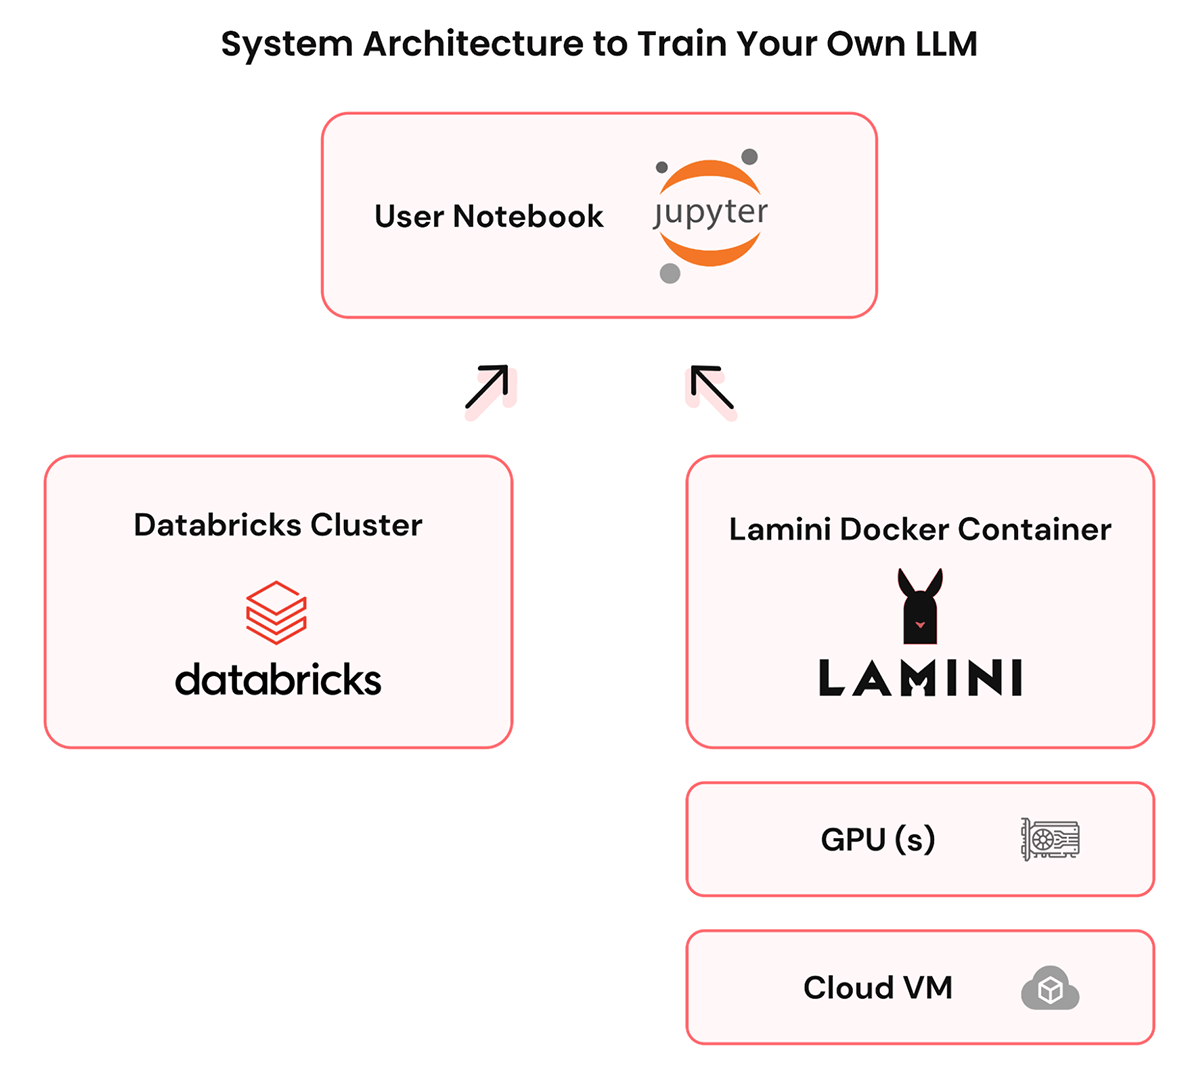 System Architecture to Train Your Own LLM